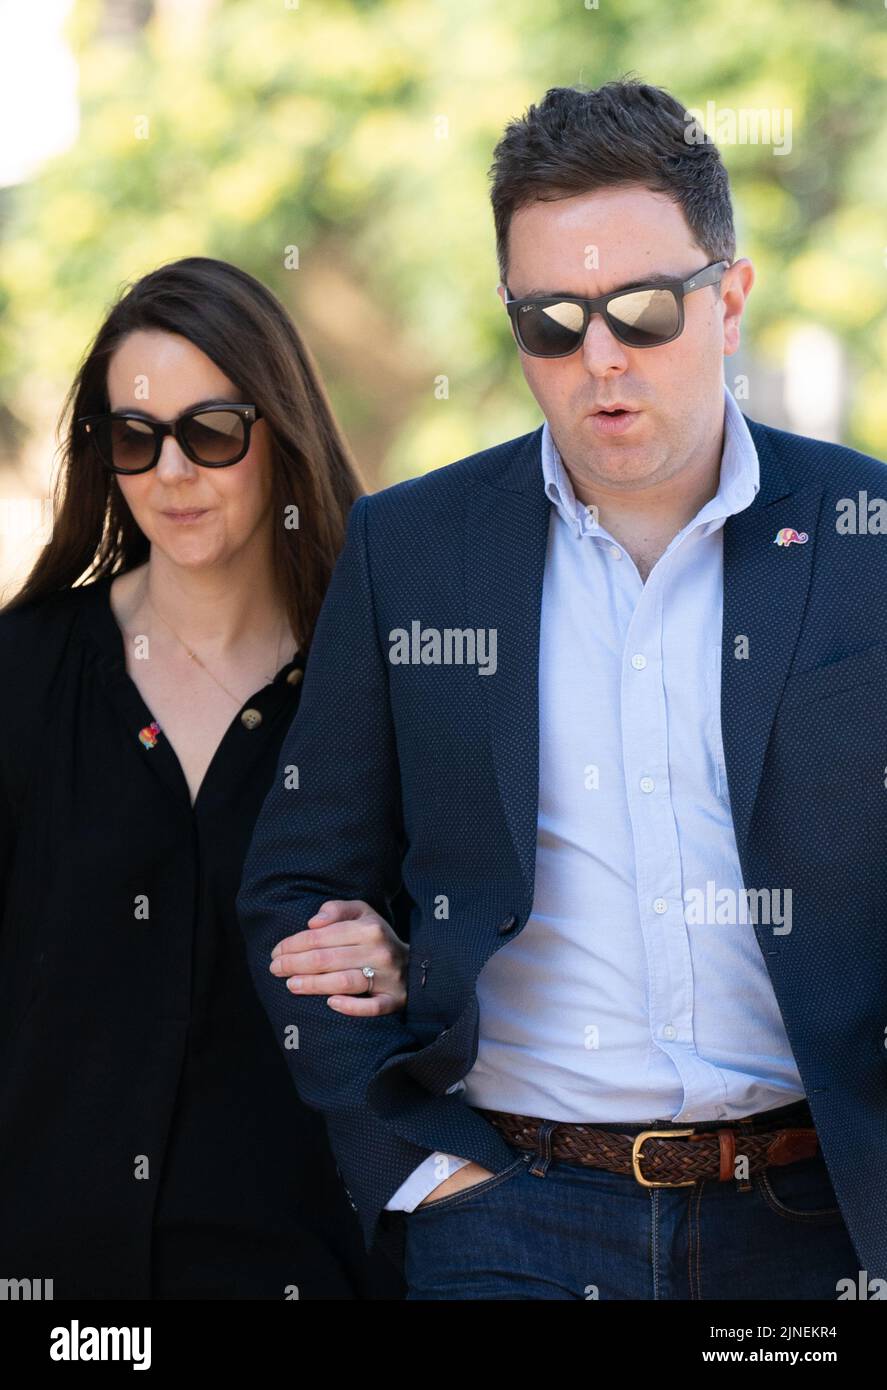 Chris and Rachael Thorold, parents of baby Louis, arrive at Cambridge Crown Court, where Shelagh Robertson is charged with causing the death of five-month-old Louis Thorold by careless driving following a crash on the A10 in Waterbeach, Cambridgeshire on January 22, 2021. Picture date: Thursday August 11, 2022. Stock Photo